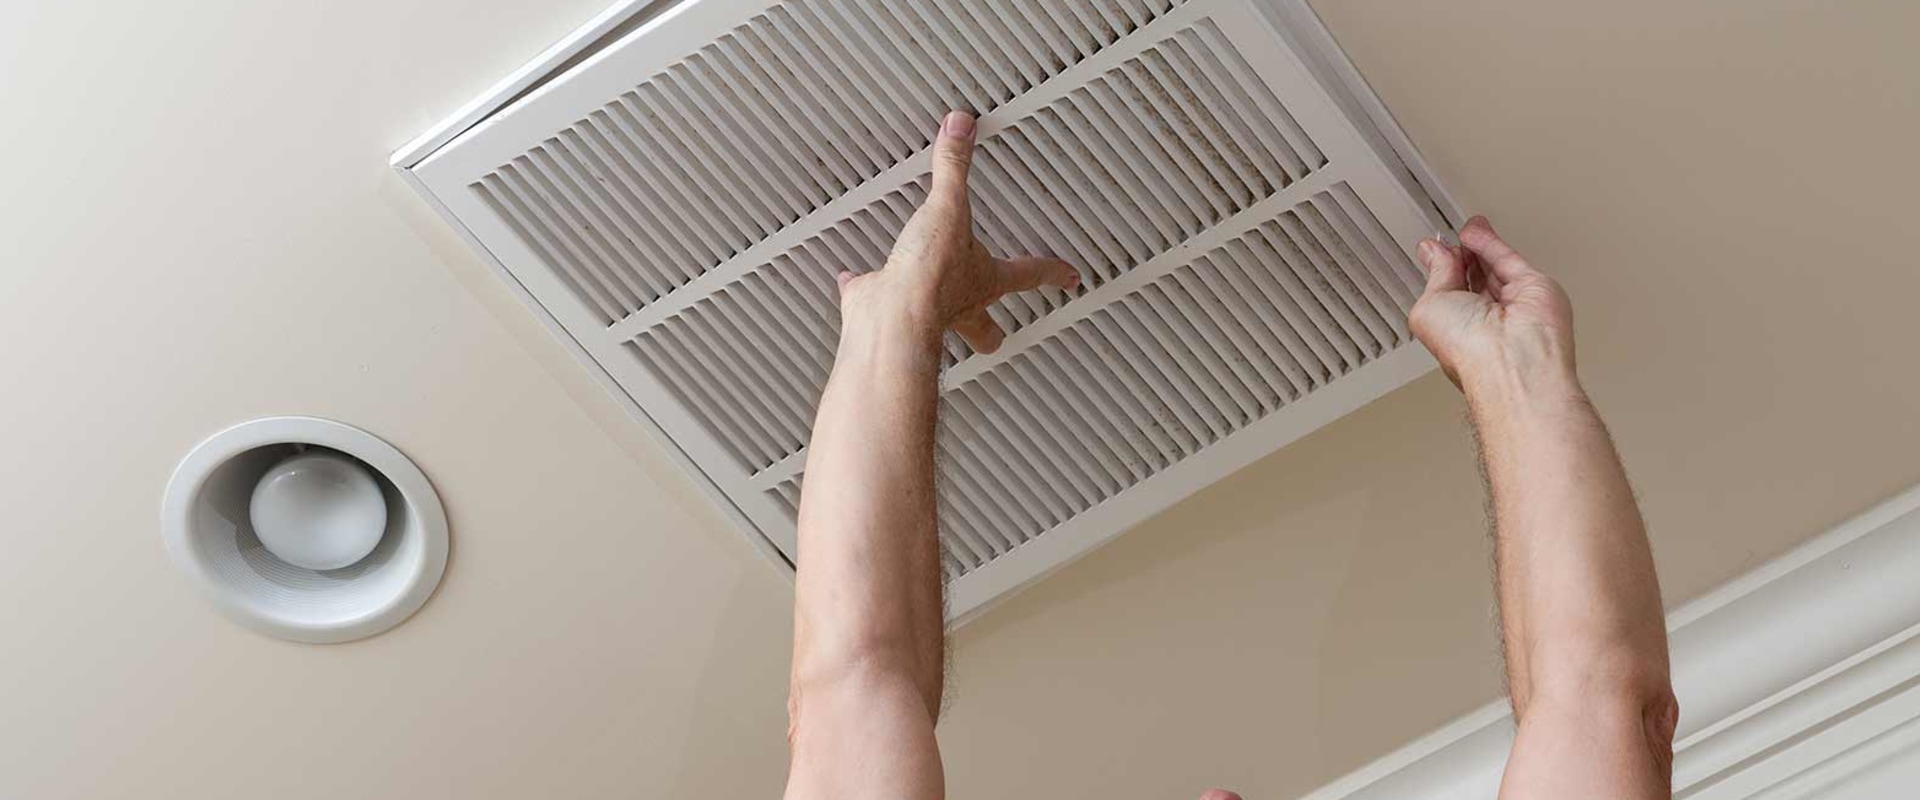 Can I Clean an AC Filter Instead of Replacing It?